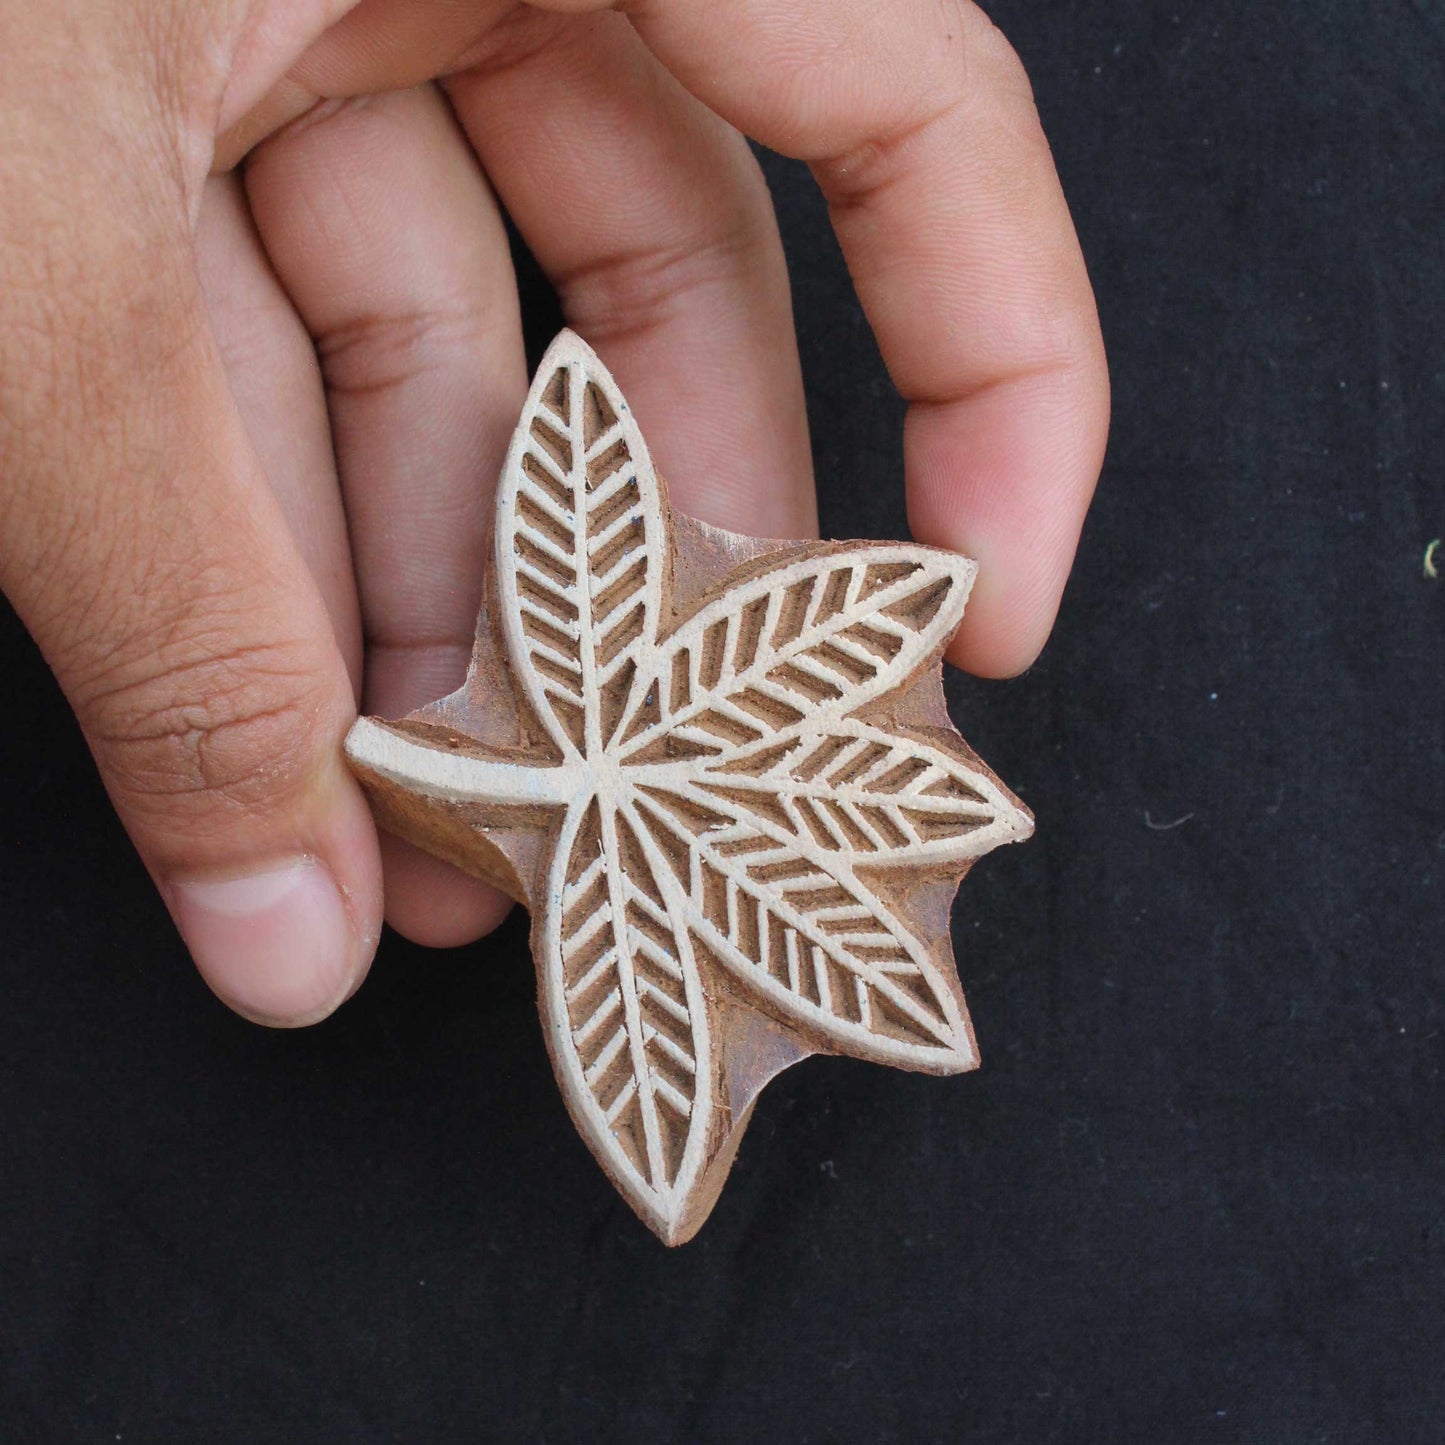 Leaves Block Print Stamp Hand Carved Wood Block Stamp Tree Fabric Stamp Hand Carved Textile Block For Printing Branch Soap Making Stamp